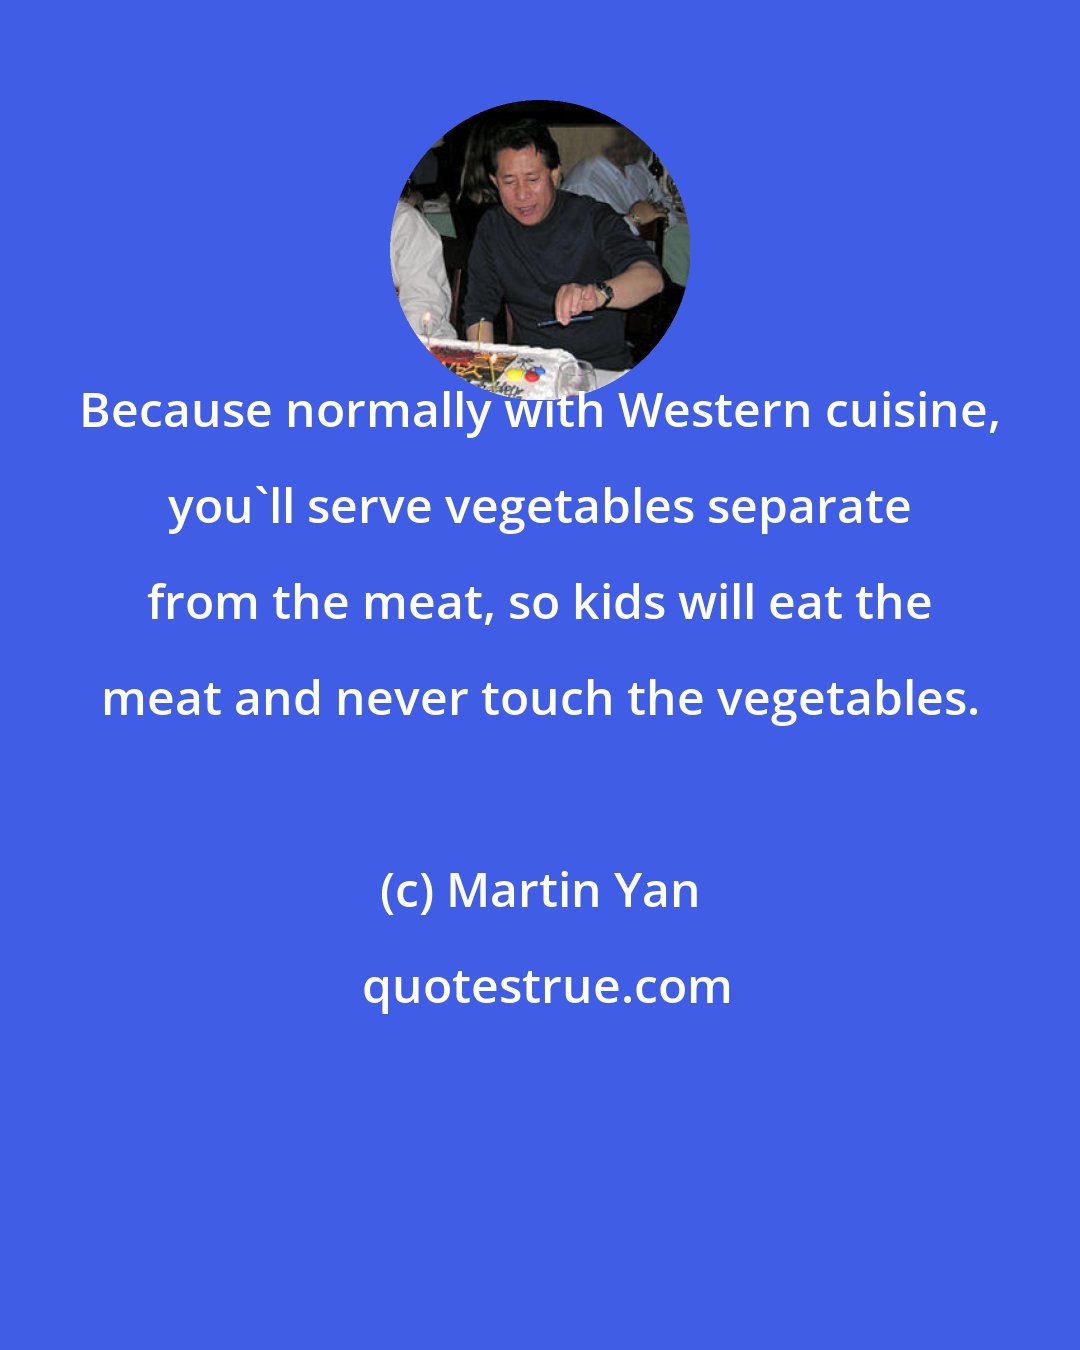 Martin Yan: Because normally with Western cuisine, you'll serve vegetables separate from the meat, so kids will eat the meat and never touch the vegetables.